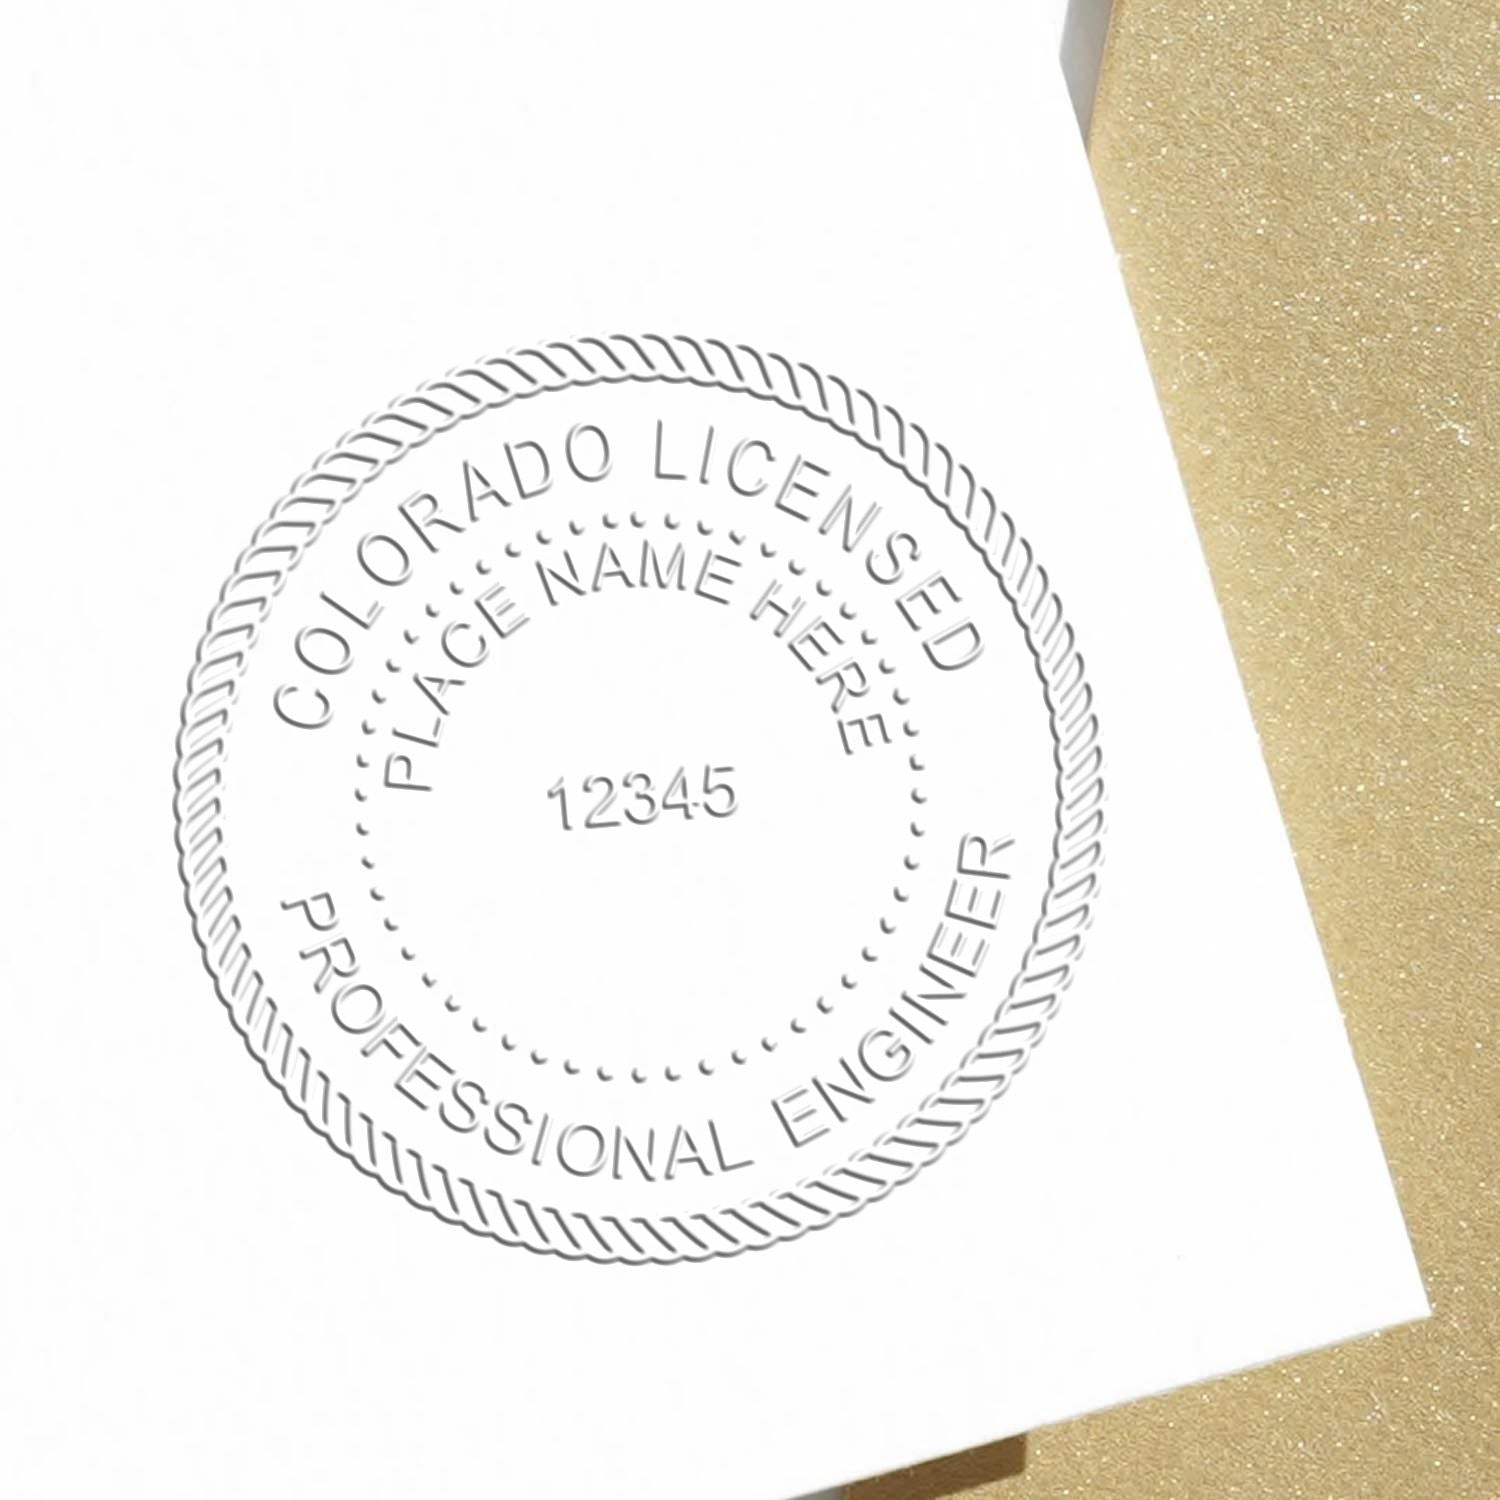 The Gift Colorado Engineer Seal stamp impression comes to life with a crisp, detailed image stamped on paper - showcasing true professional quality.